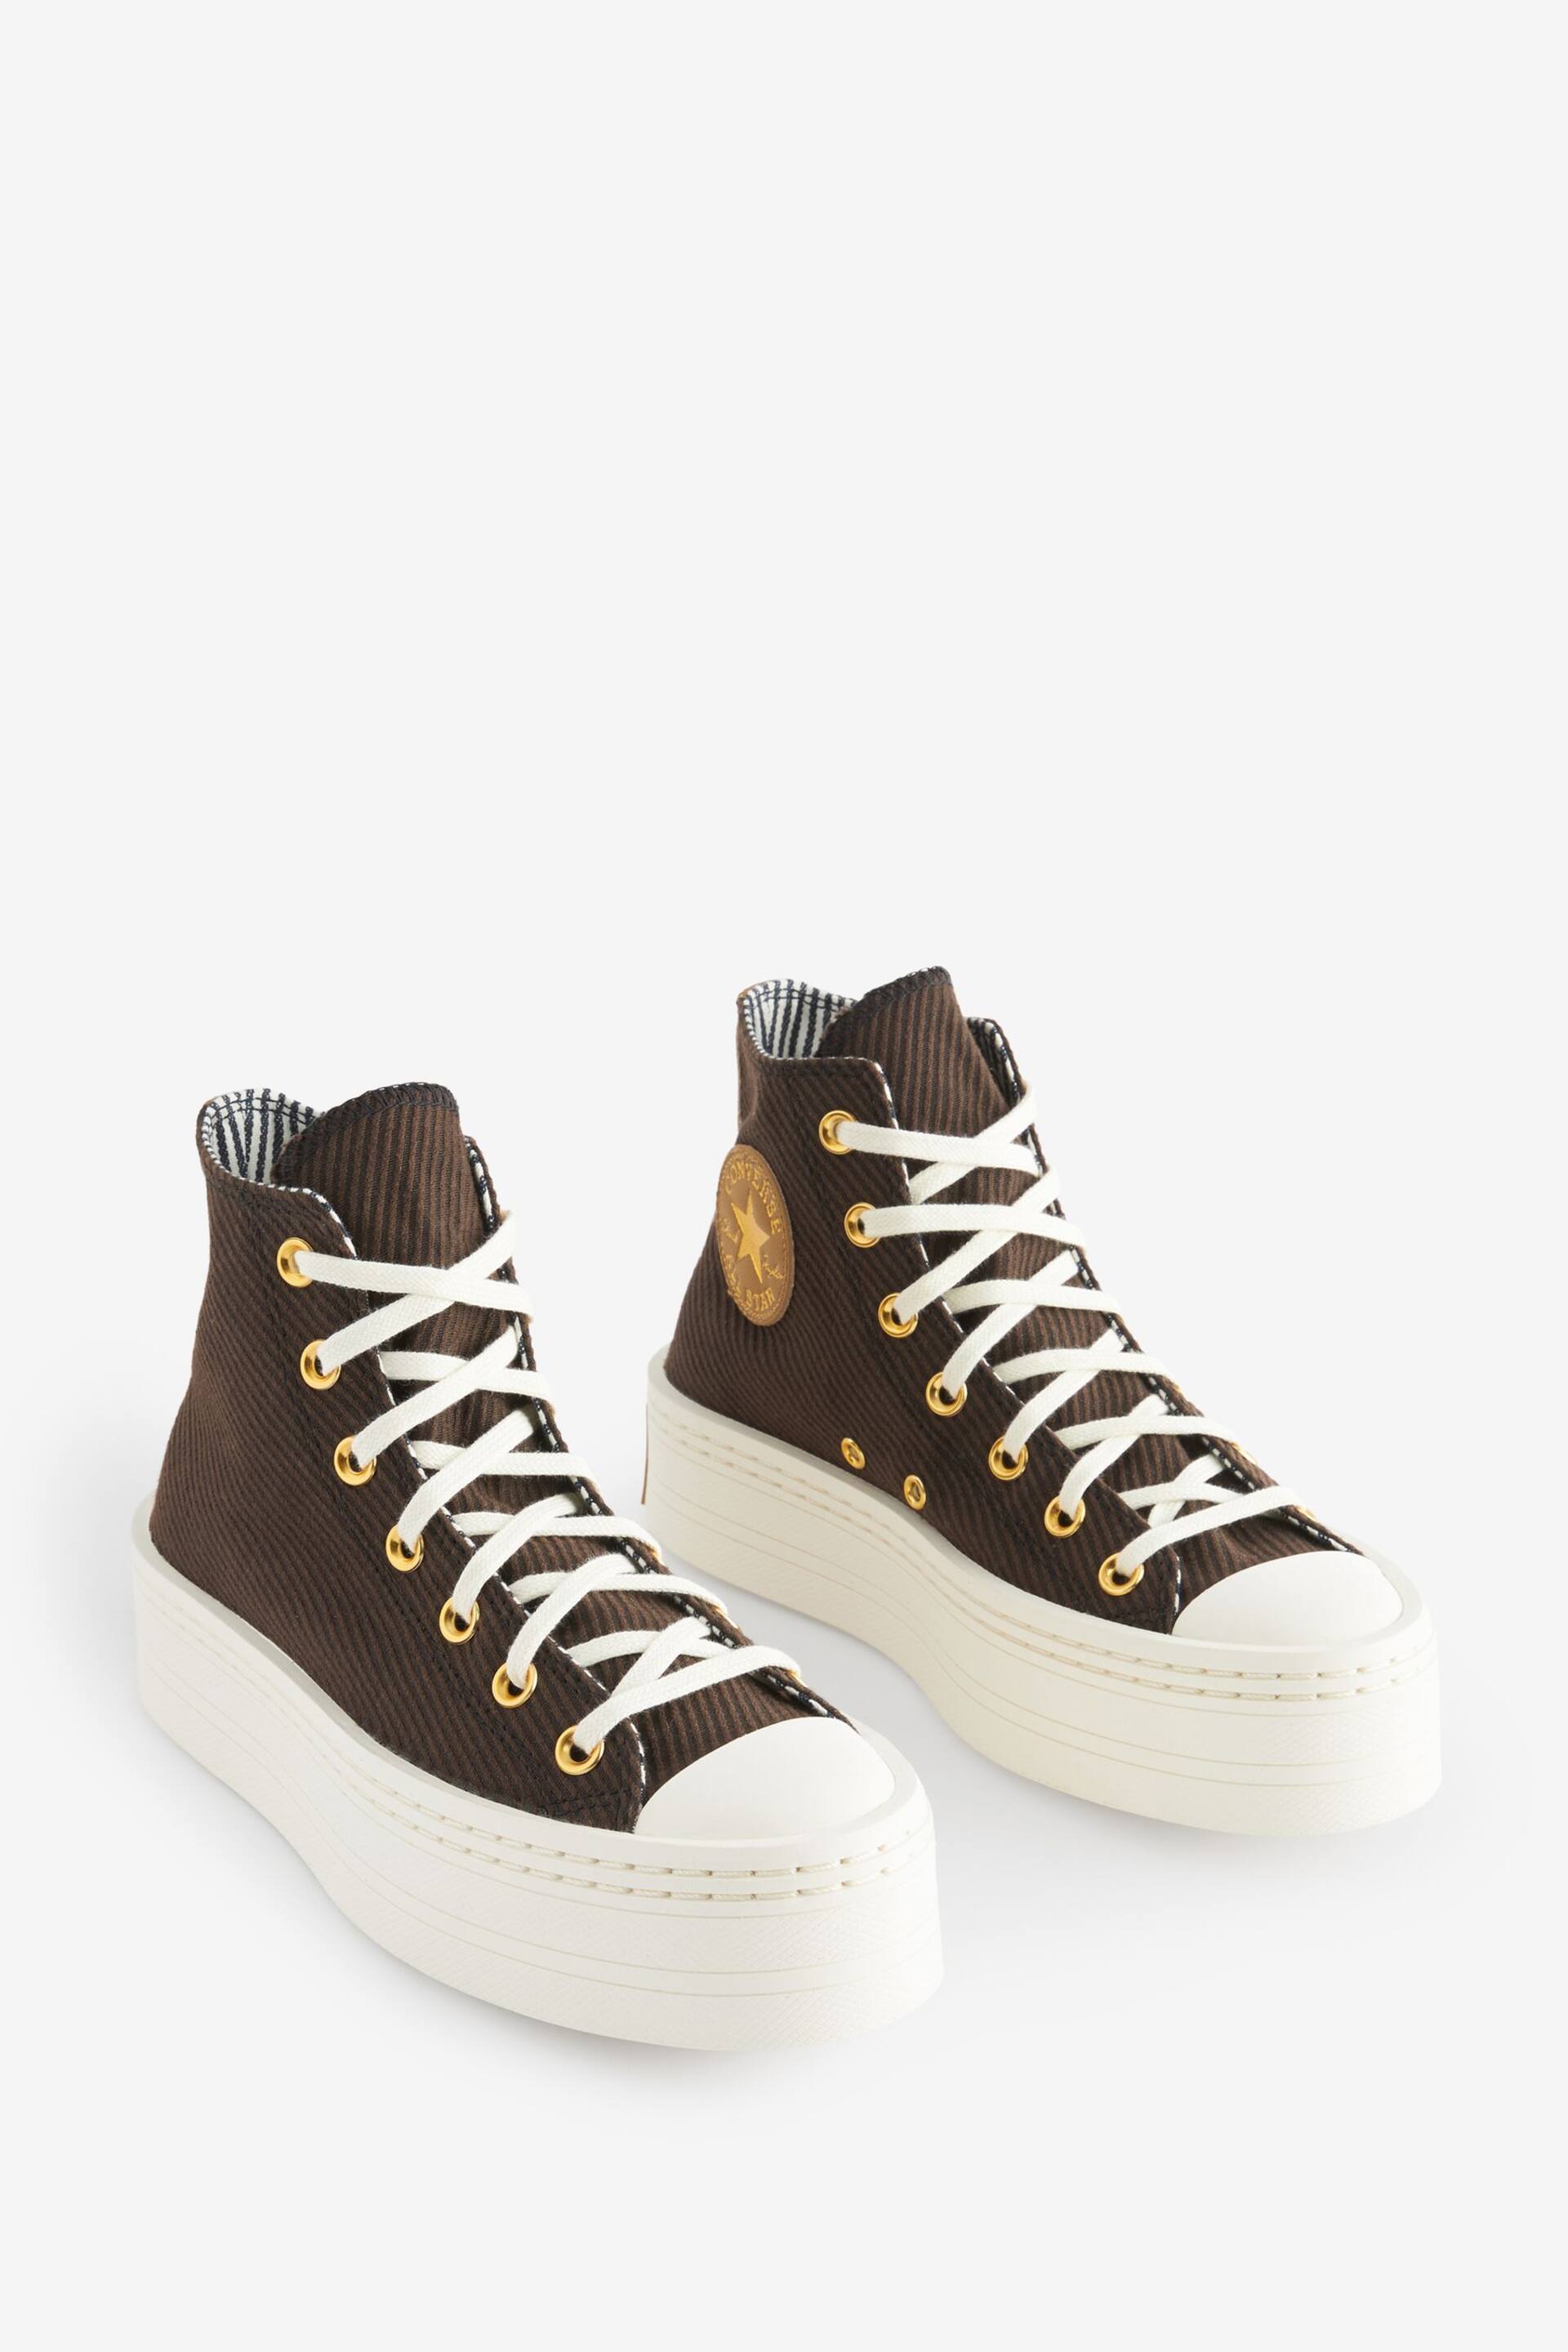 Converse Brown Modern Lift Trainers - Image 5 of 16